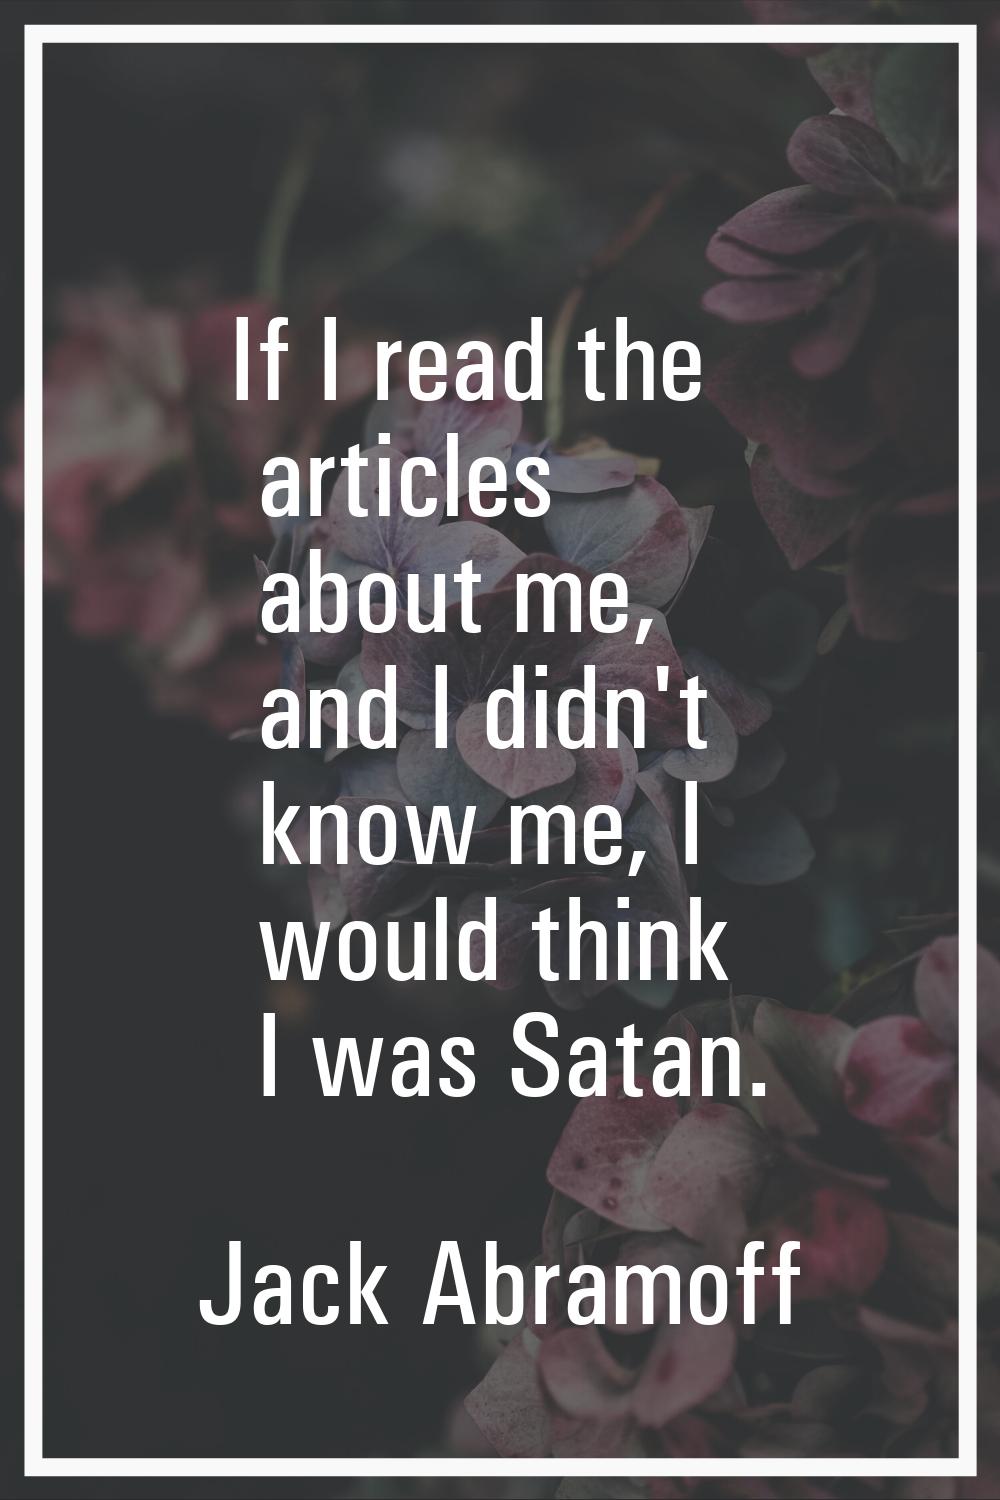 If I read the articles about me, and I didn't know me, I would think I was Satan.